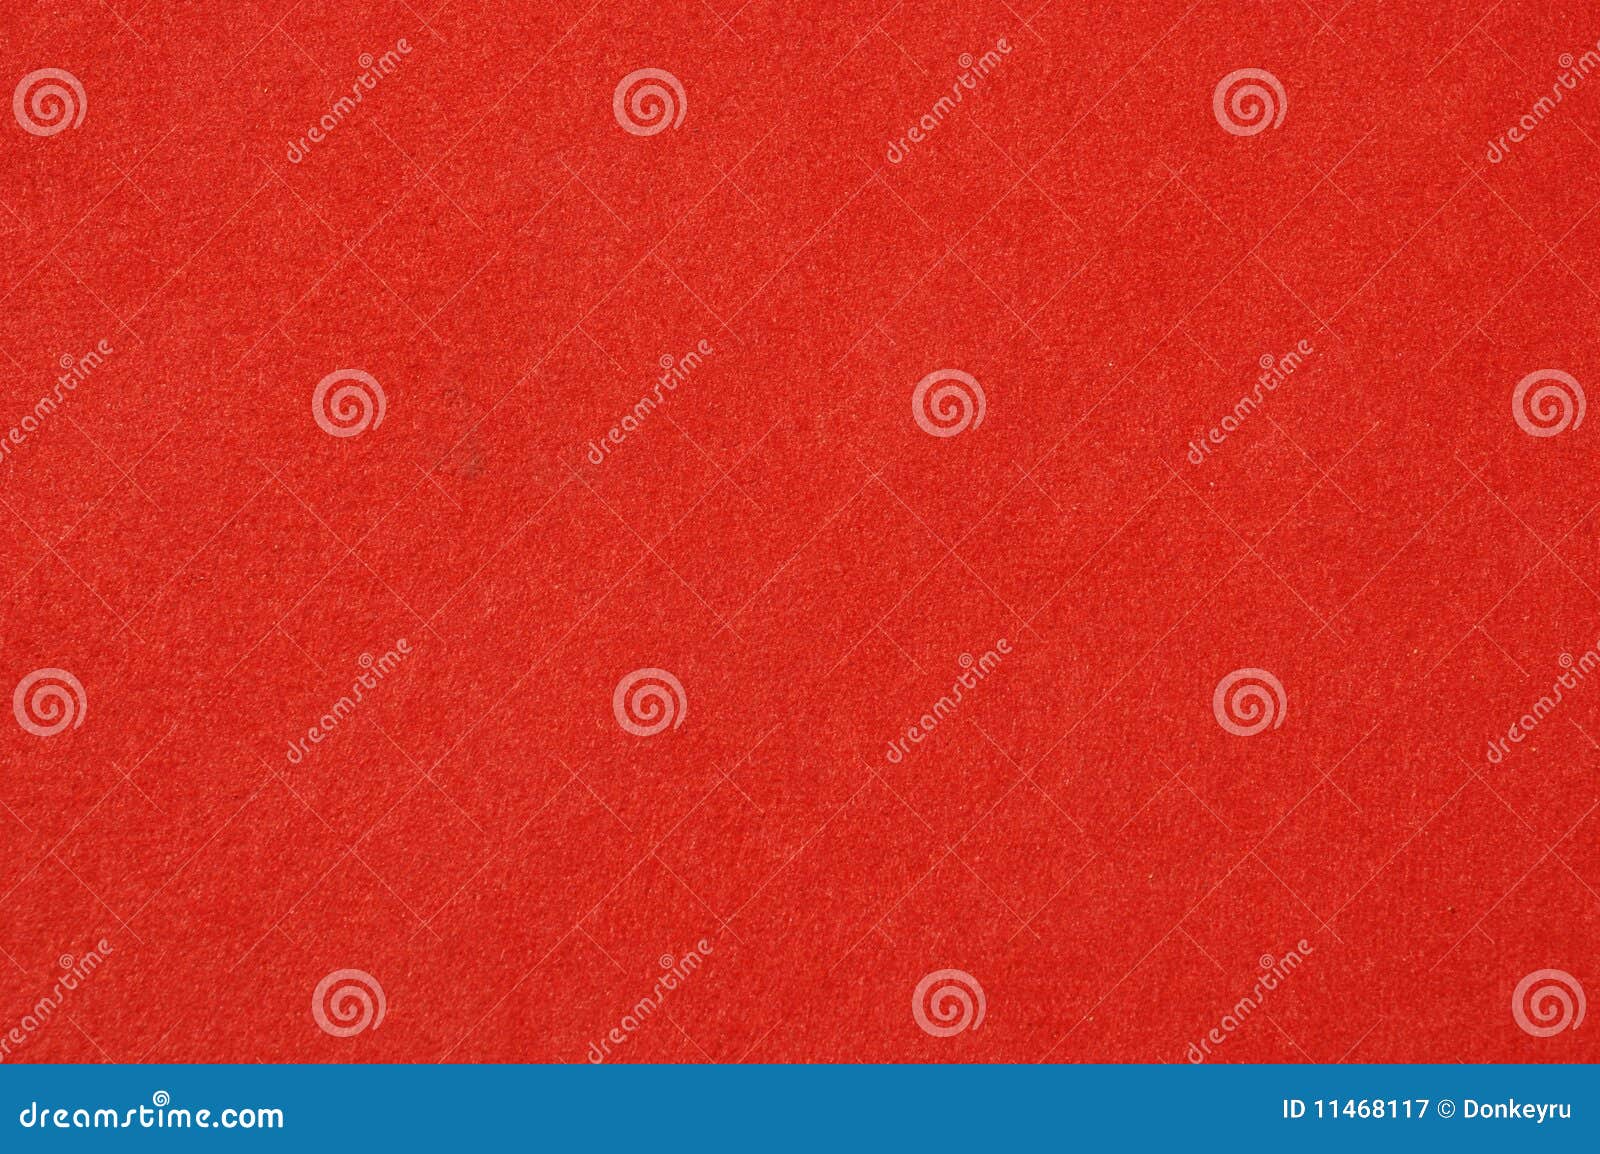 red carpet background